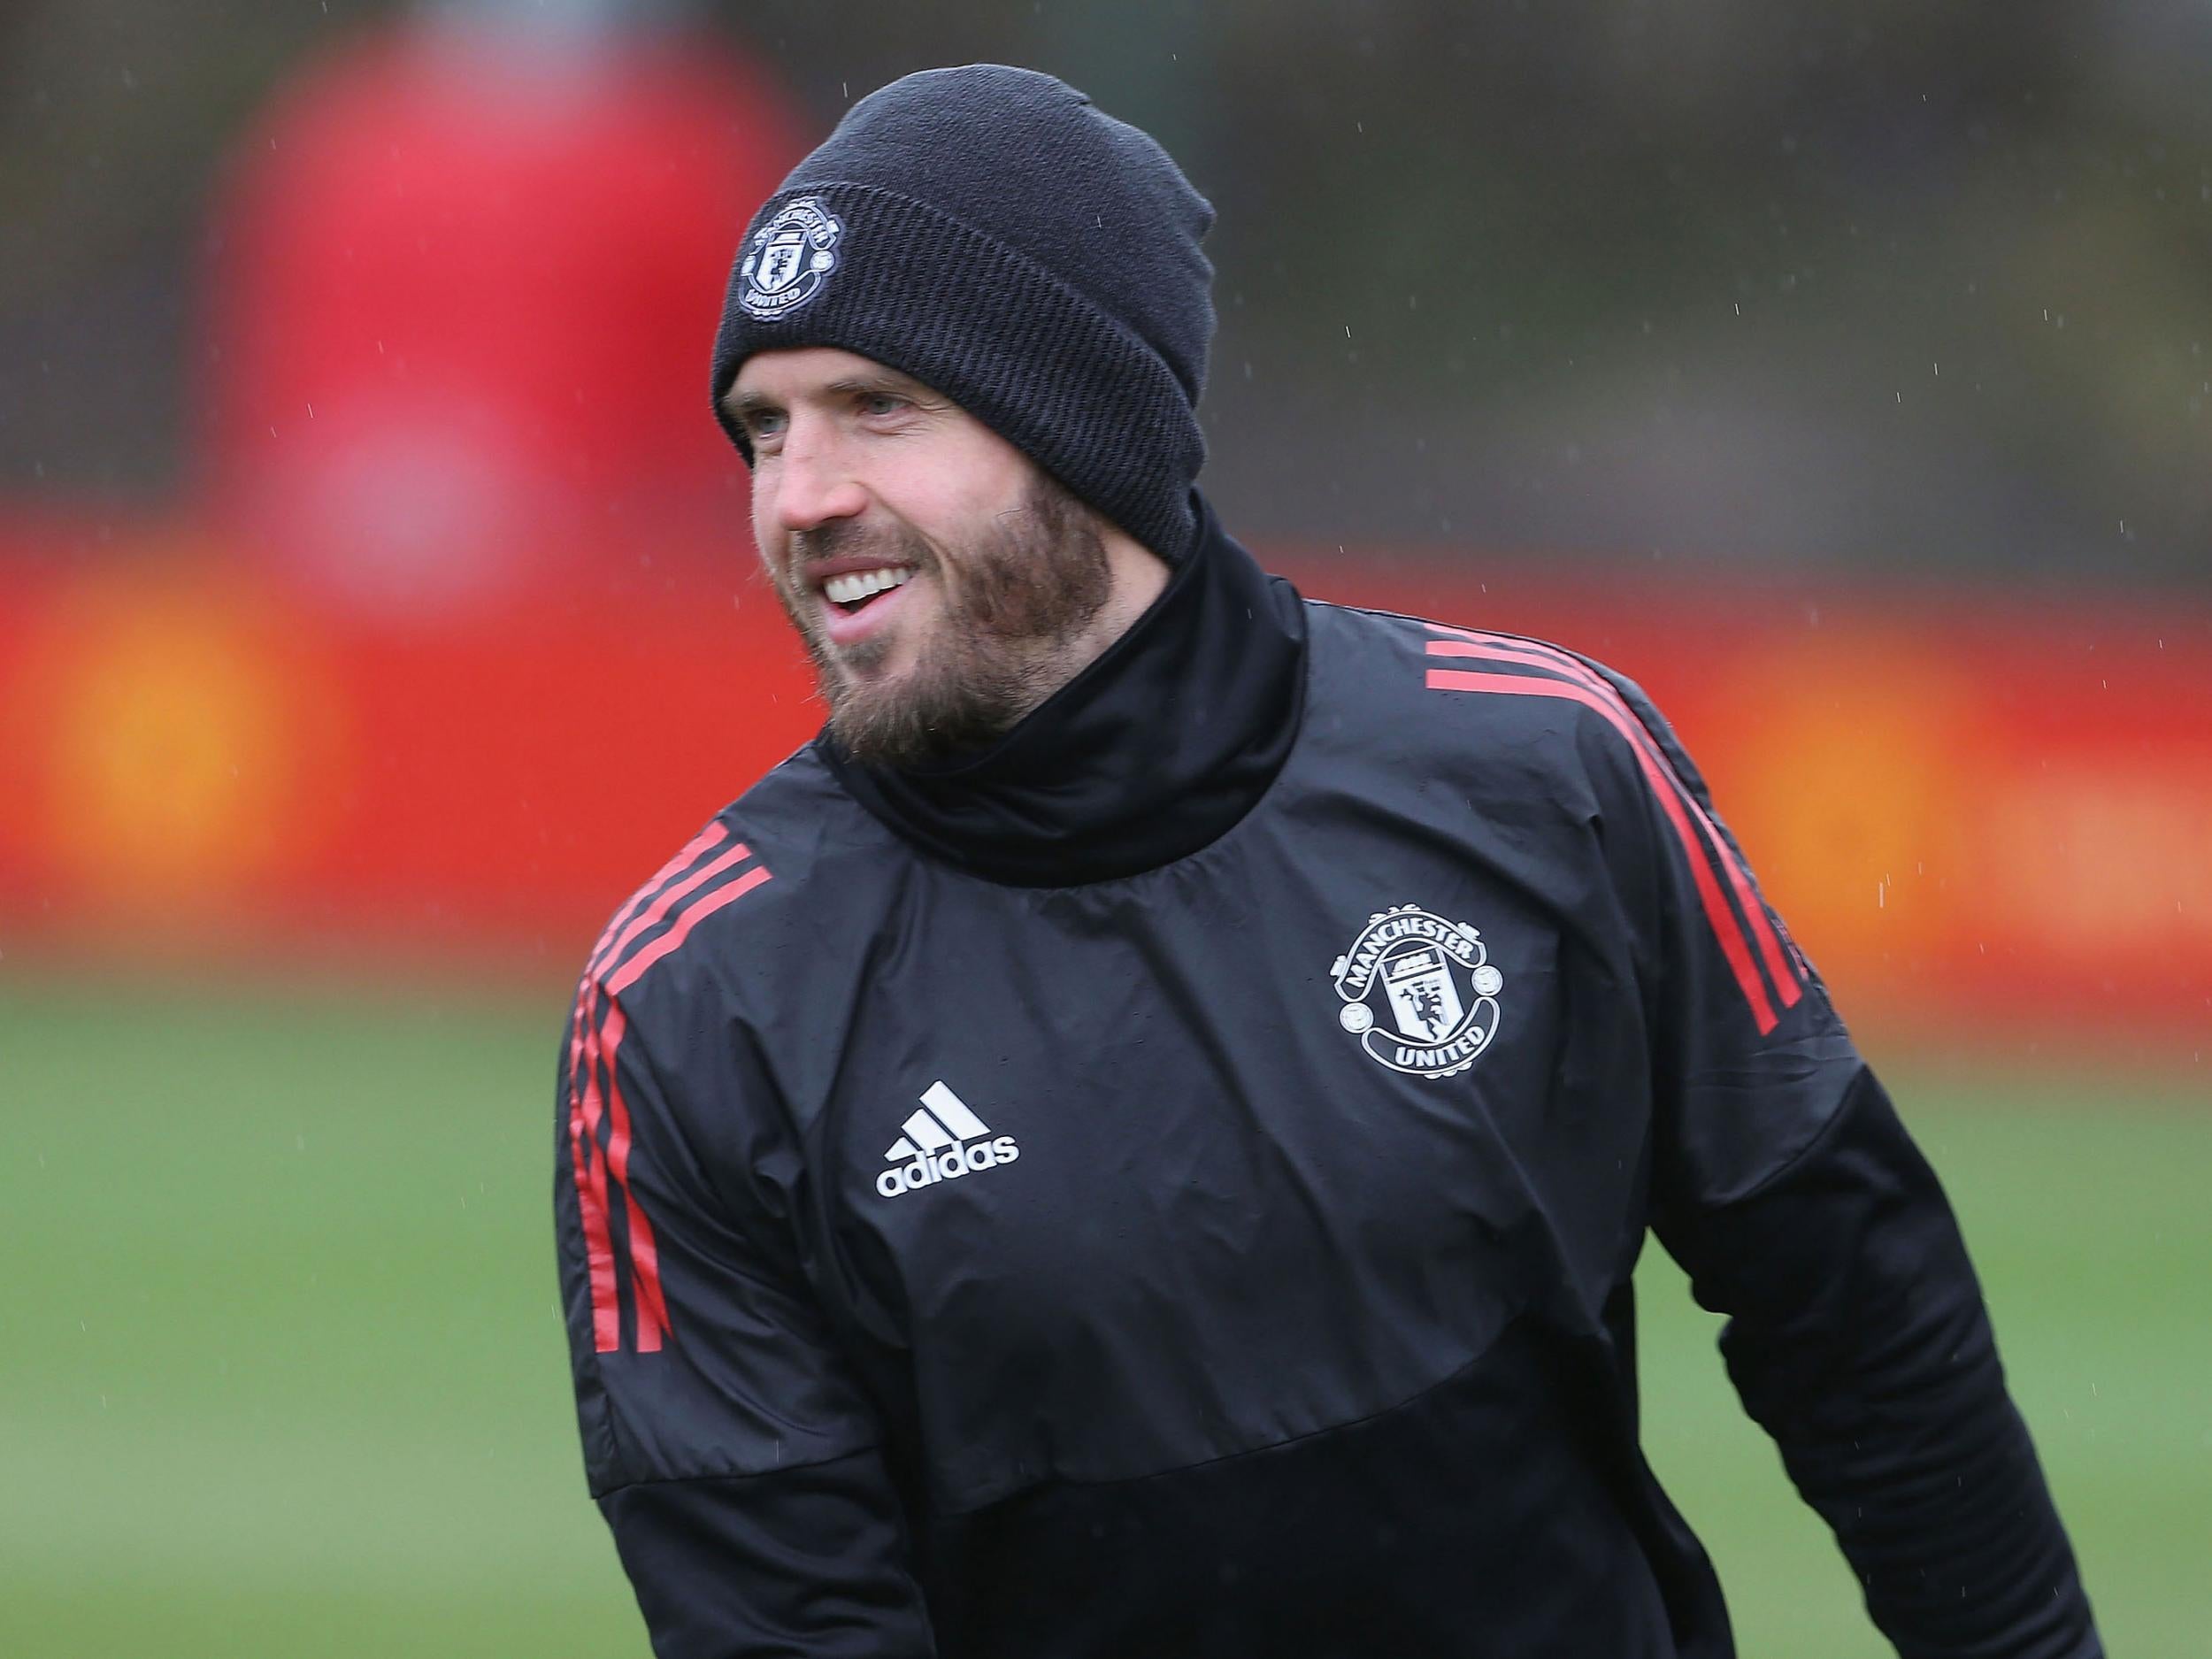 Michael Carrick will bring his playing career to an end this summer